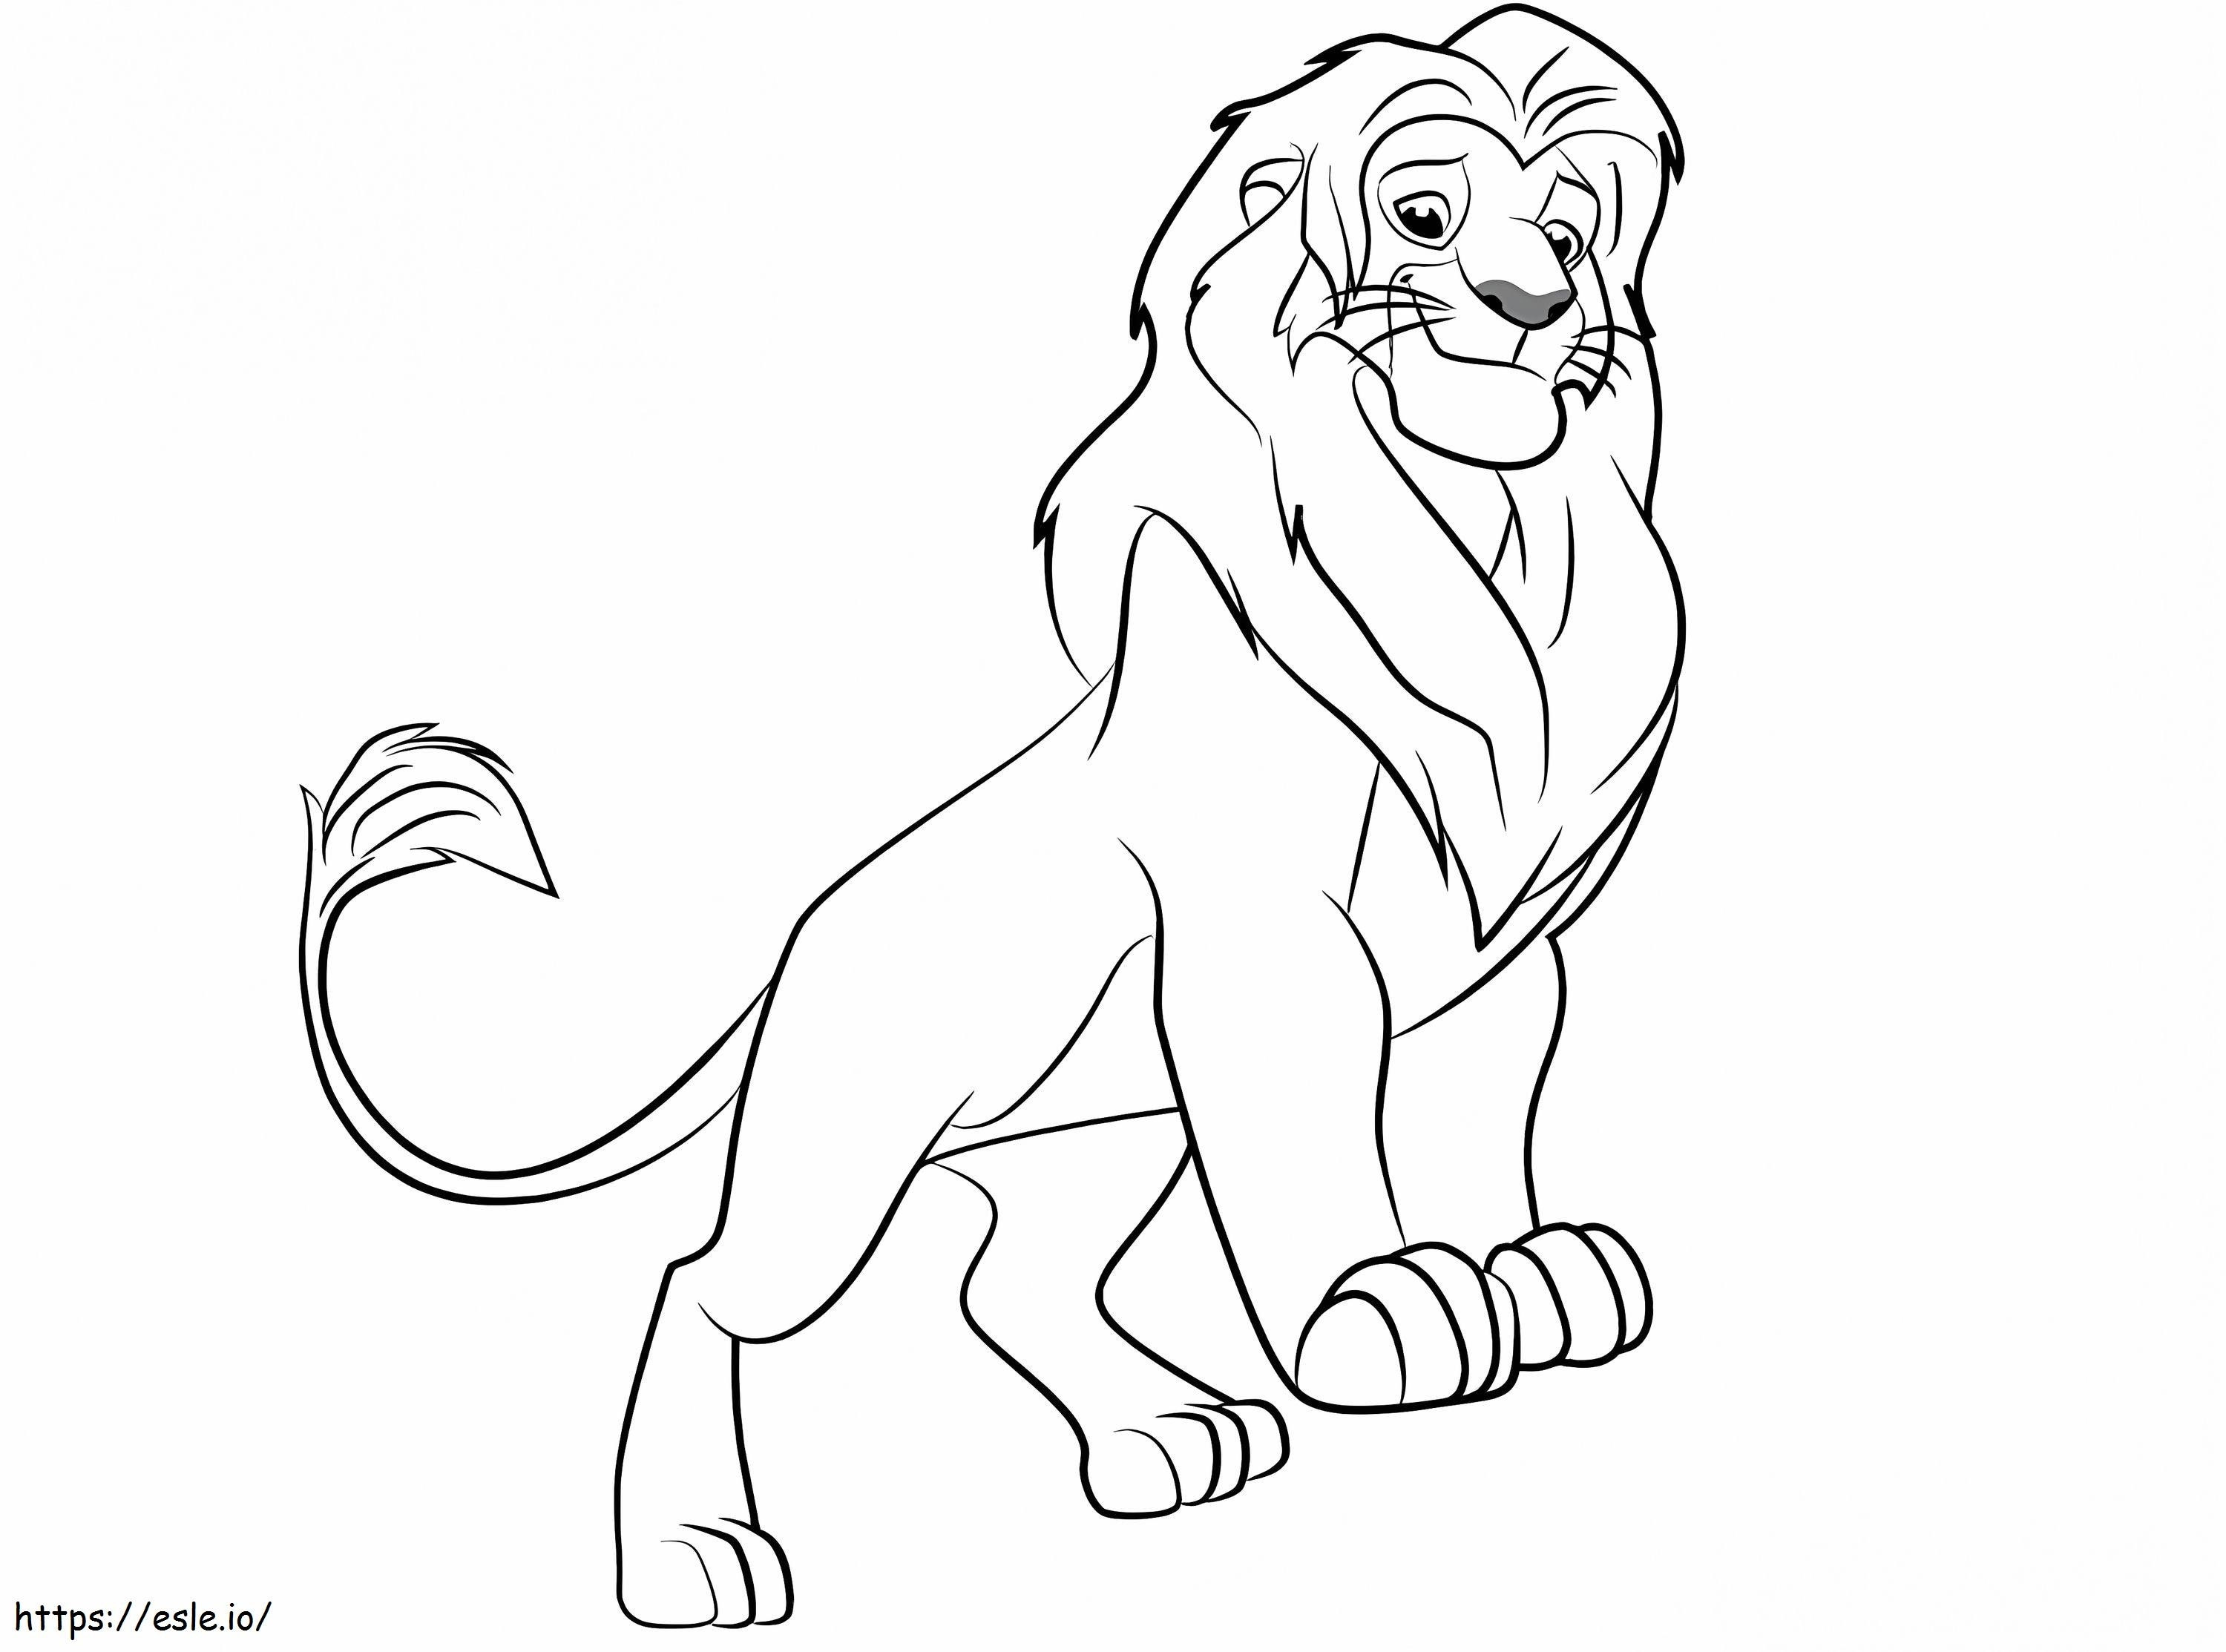 Cool Simba coloring page